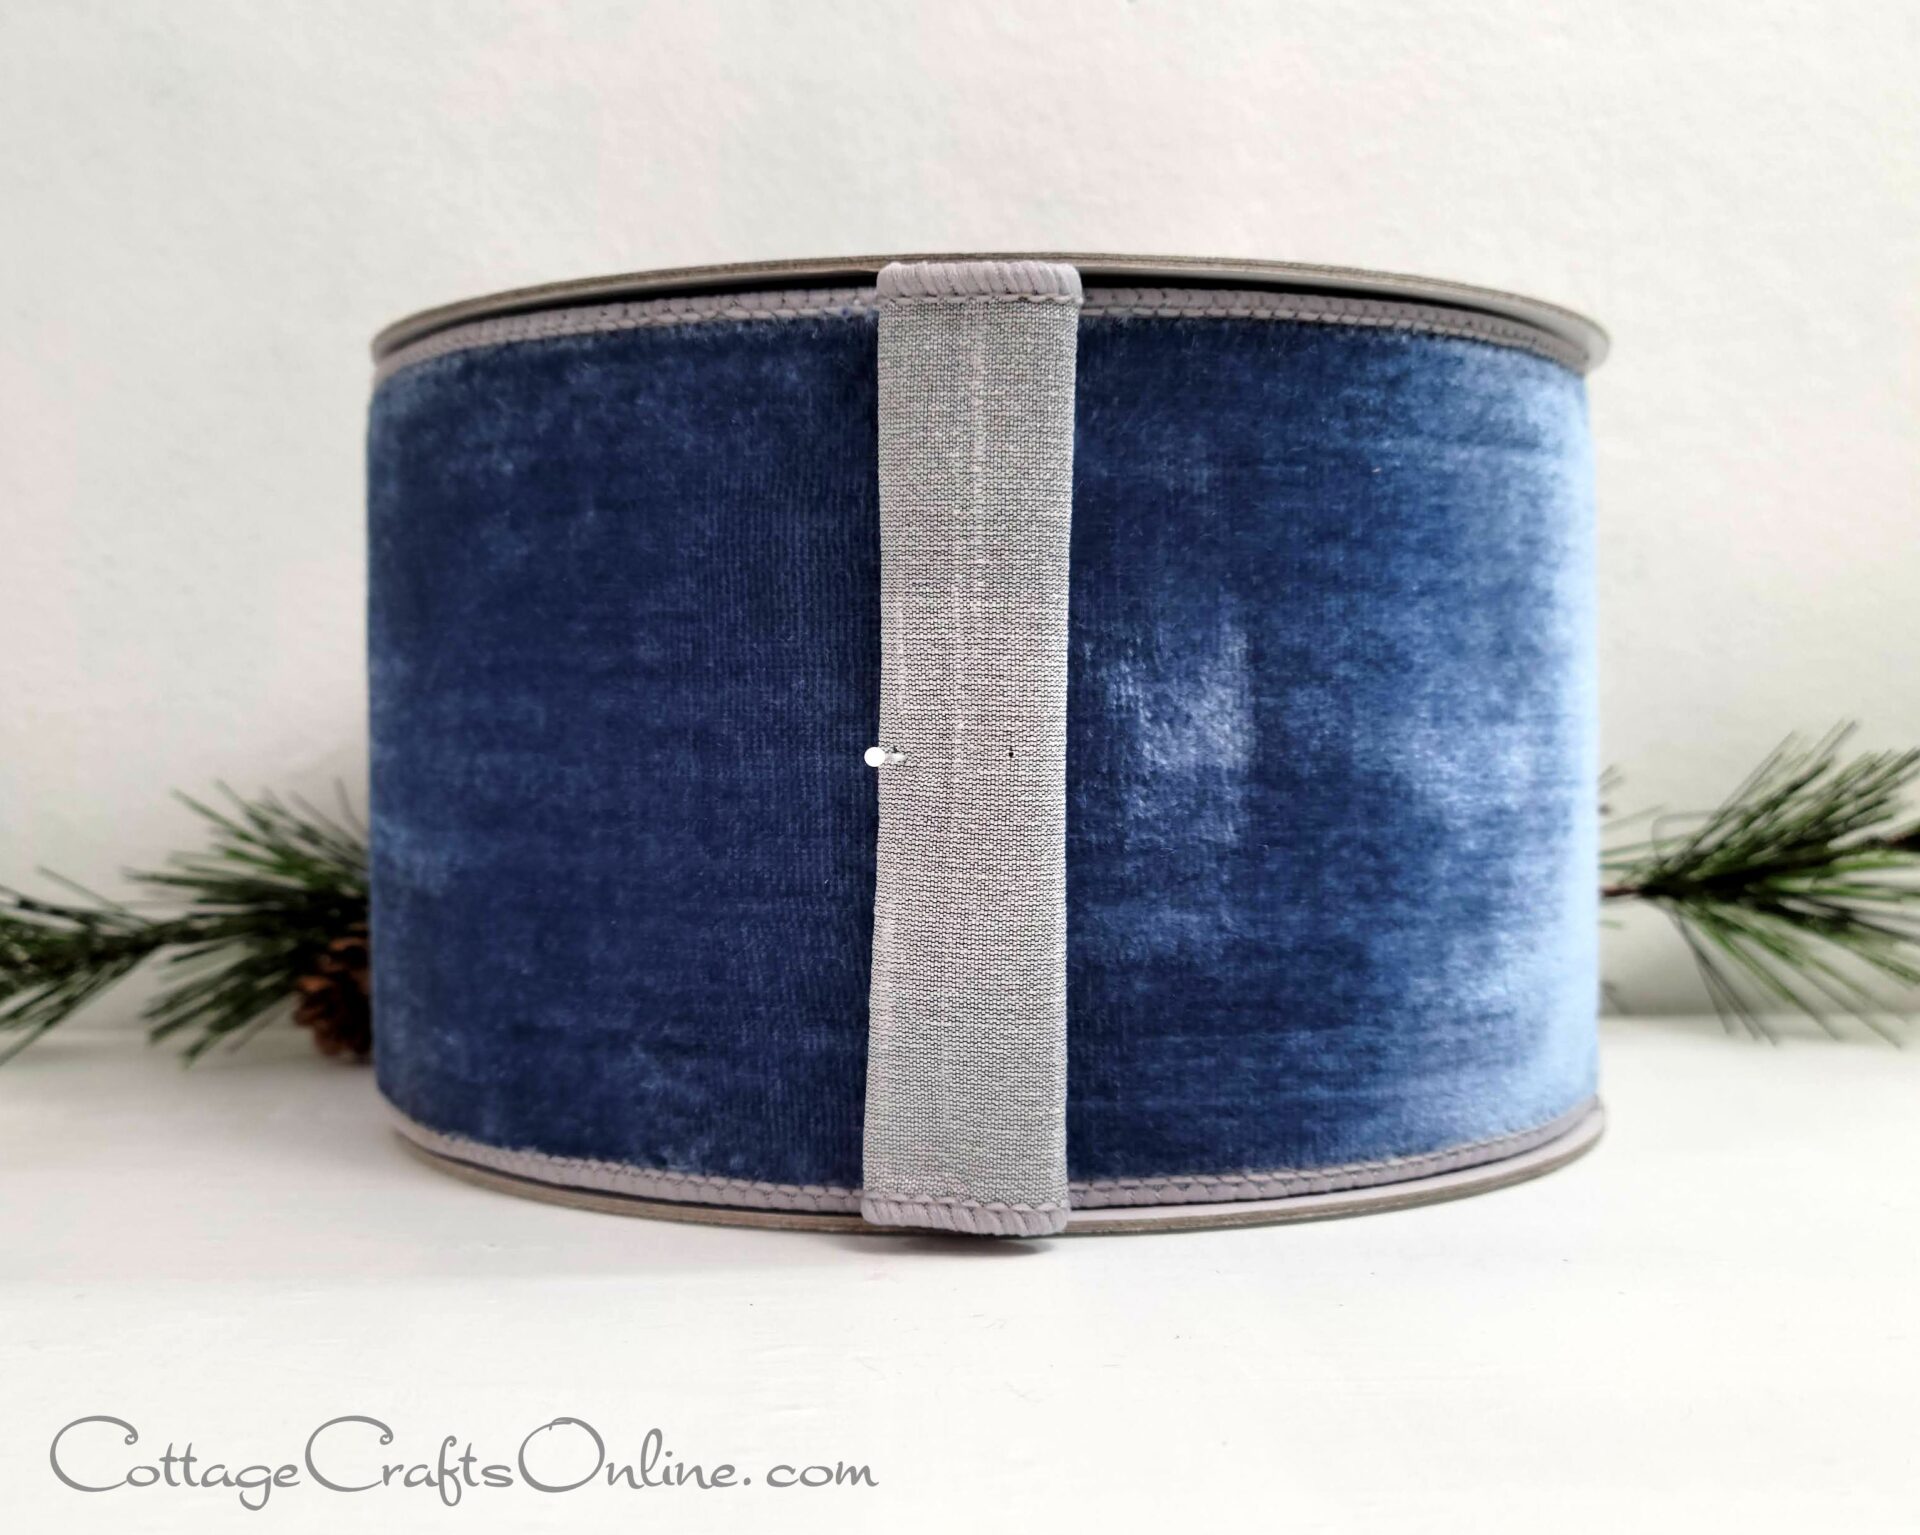 A blue velvet ribbon with silver trim on top of it.